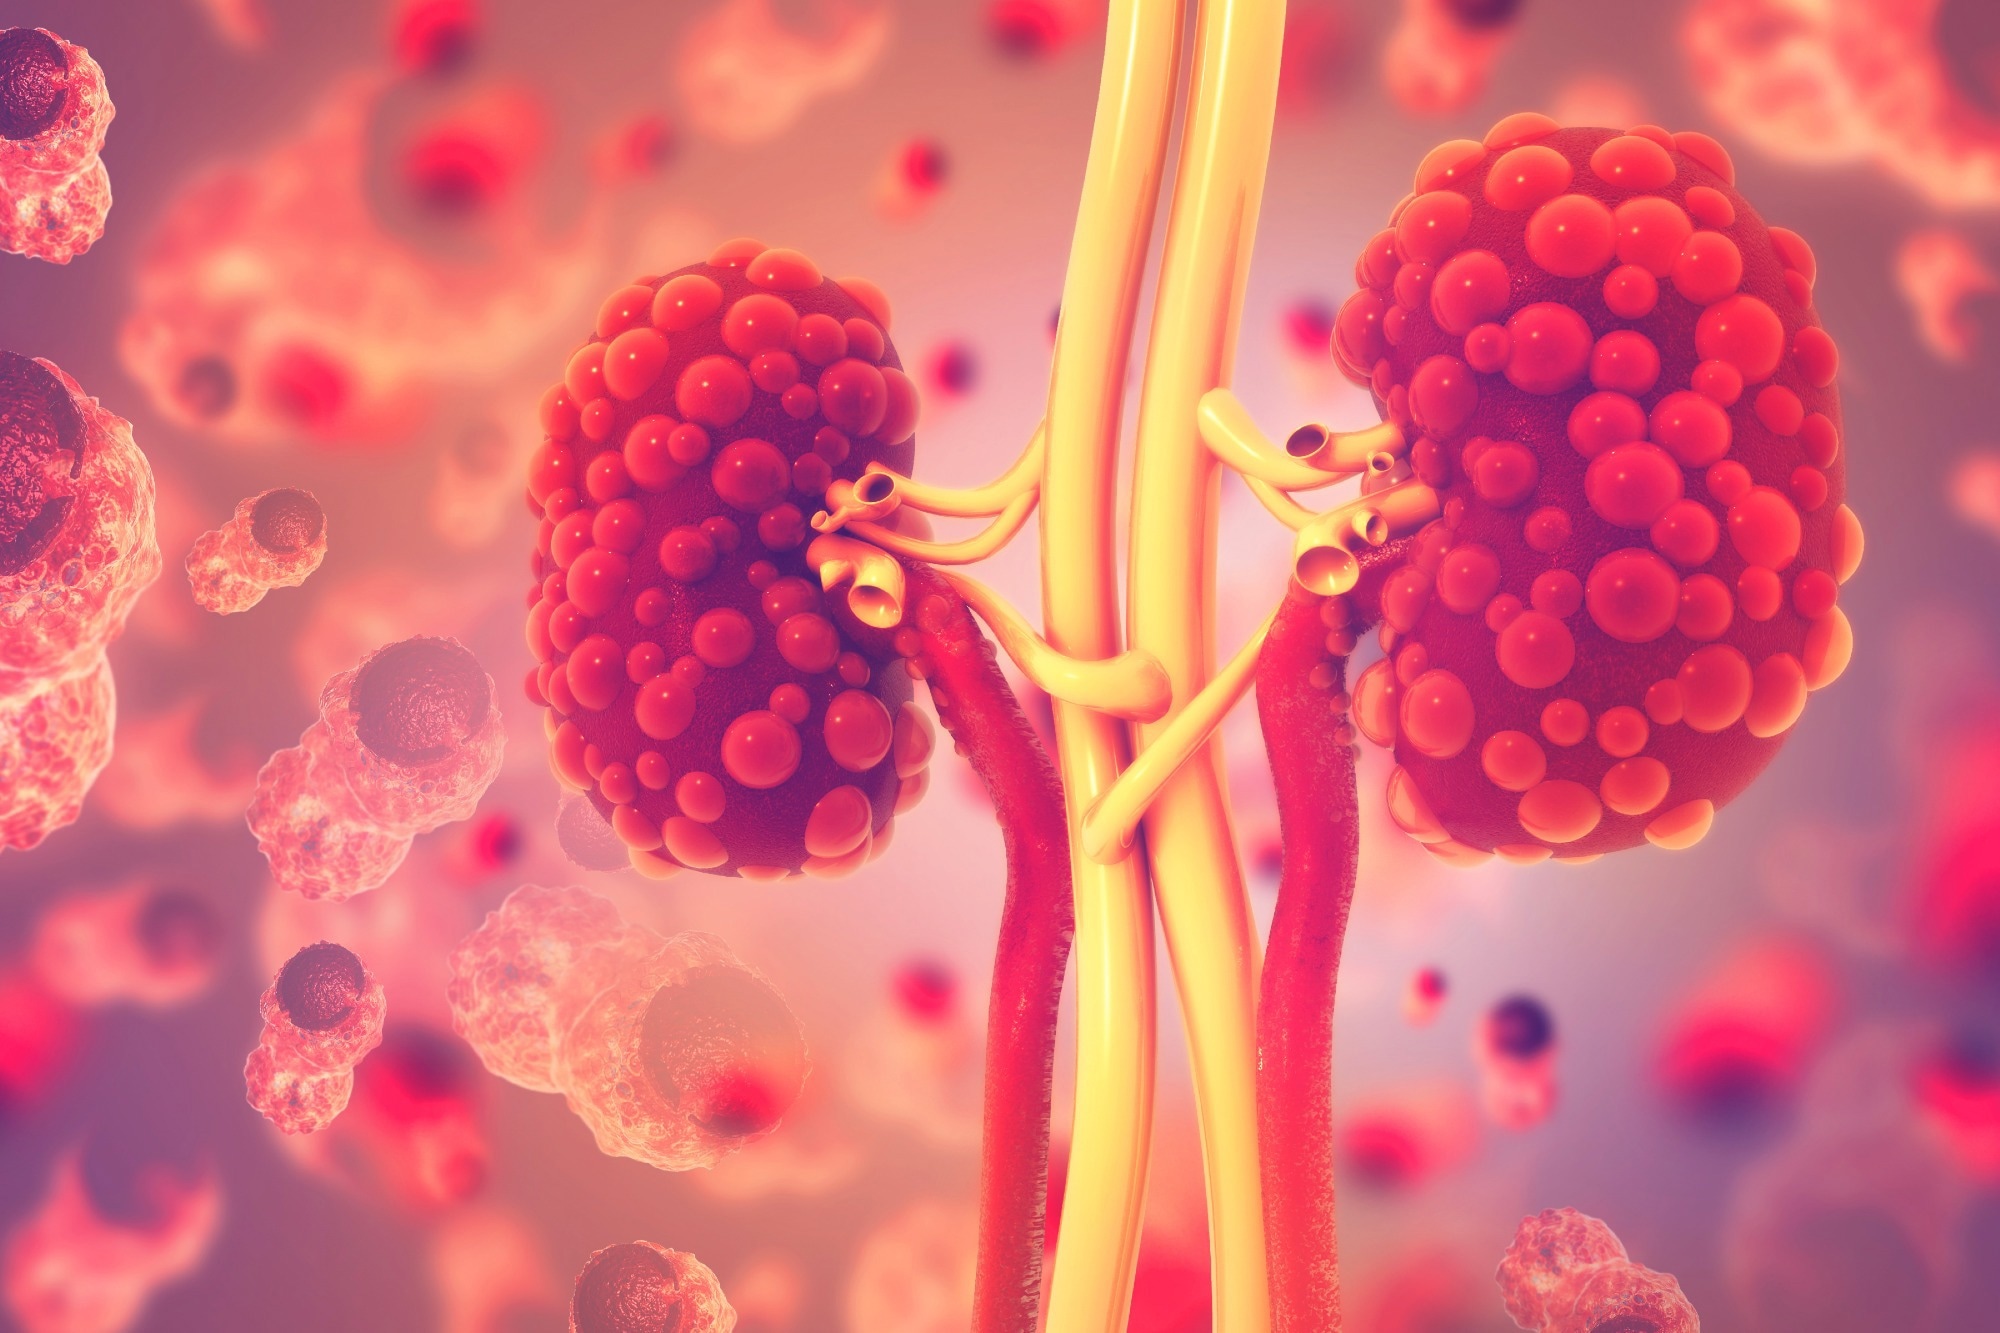 Study: DNA-dependent protein kinase catalytic subunit (DNA-PKcs) drives chronic kidney disease progression in male mice. Image Credit: crystal light / Shutterstock